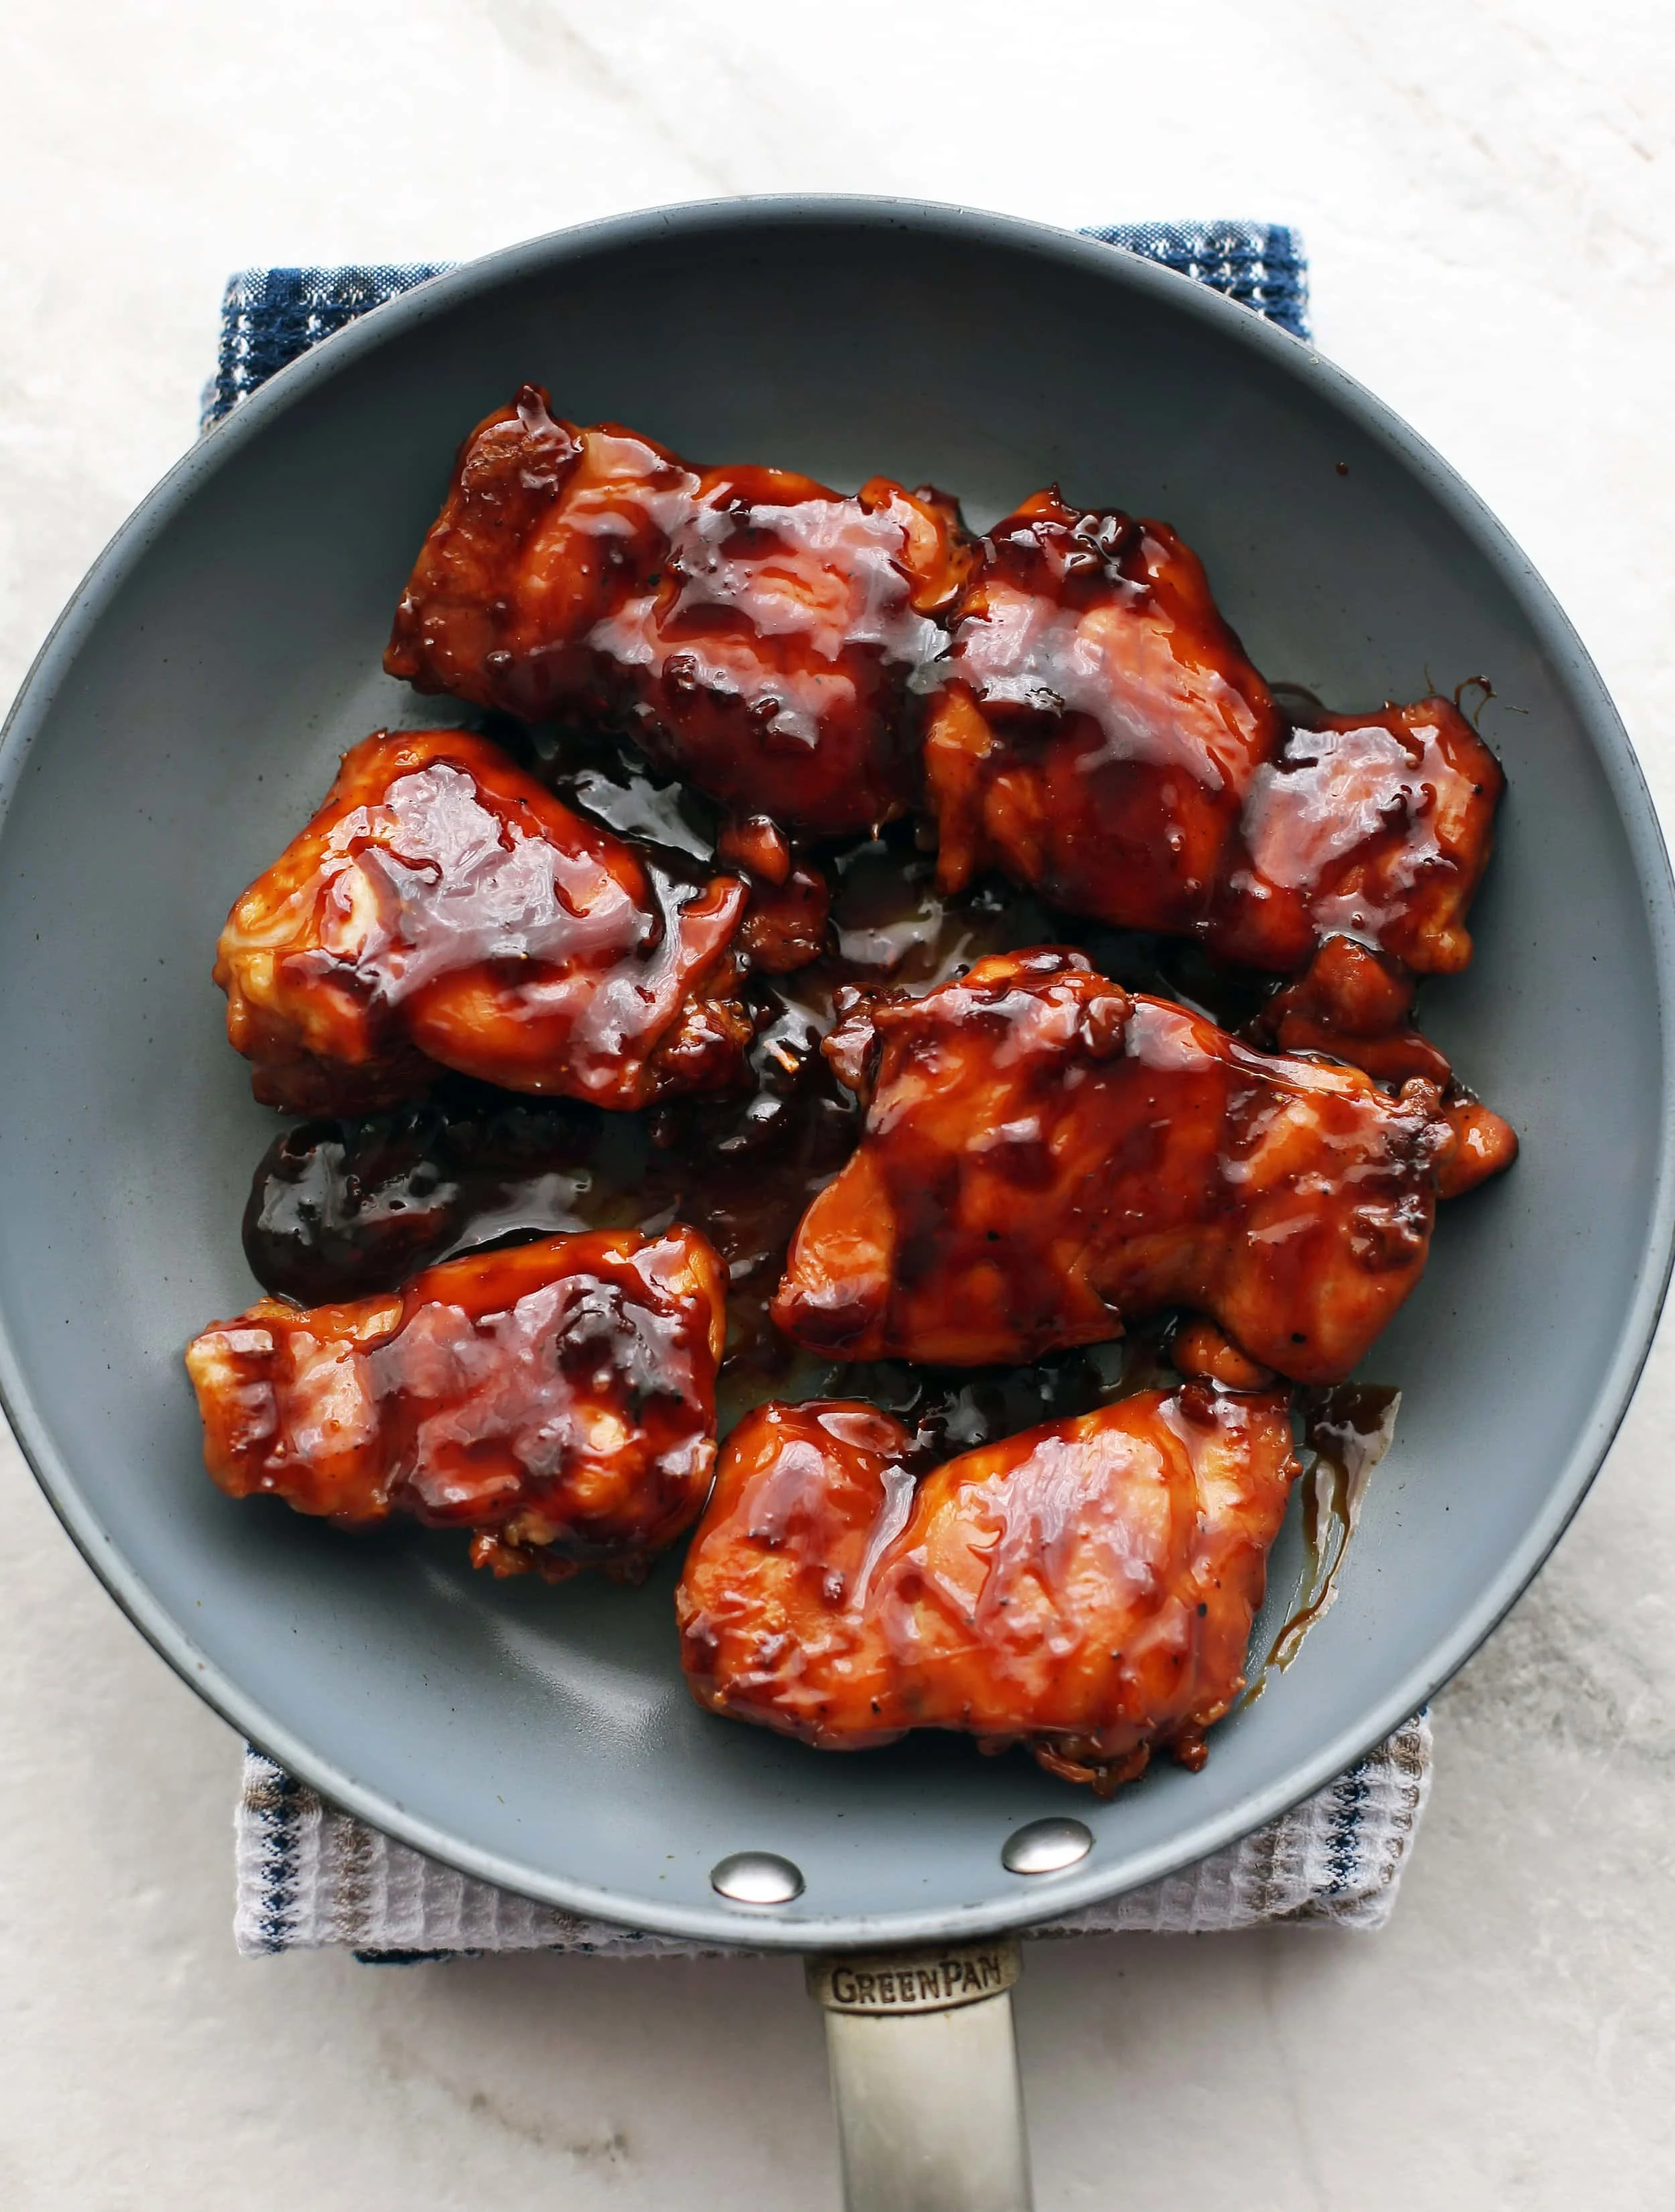 Six pan-cooked chicken thighs covered with teriyaki sauce in a skillet.